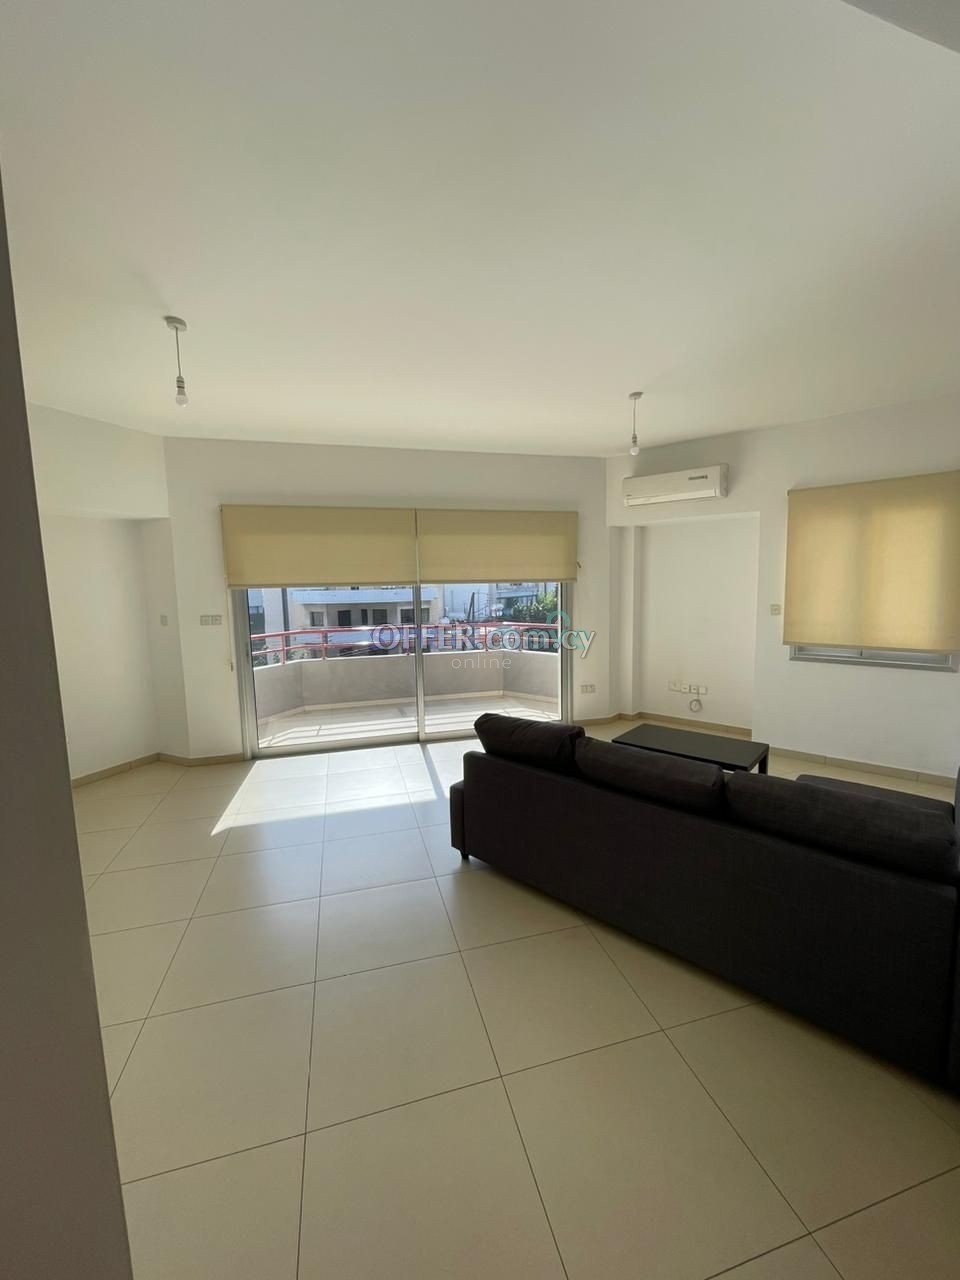 2 + 1 Bedroom Apartment For Rent Limassol - 1